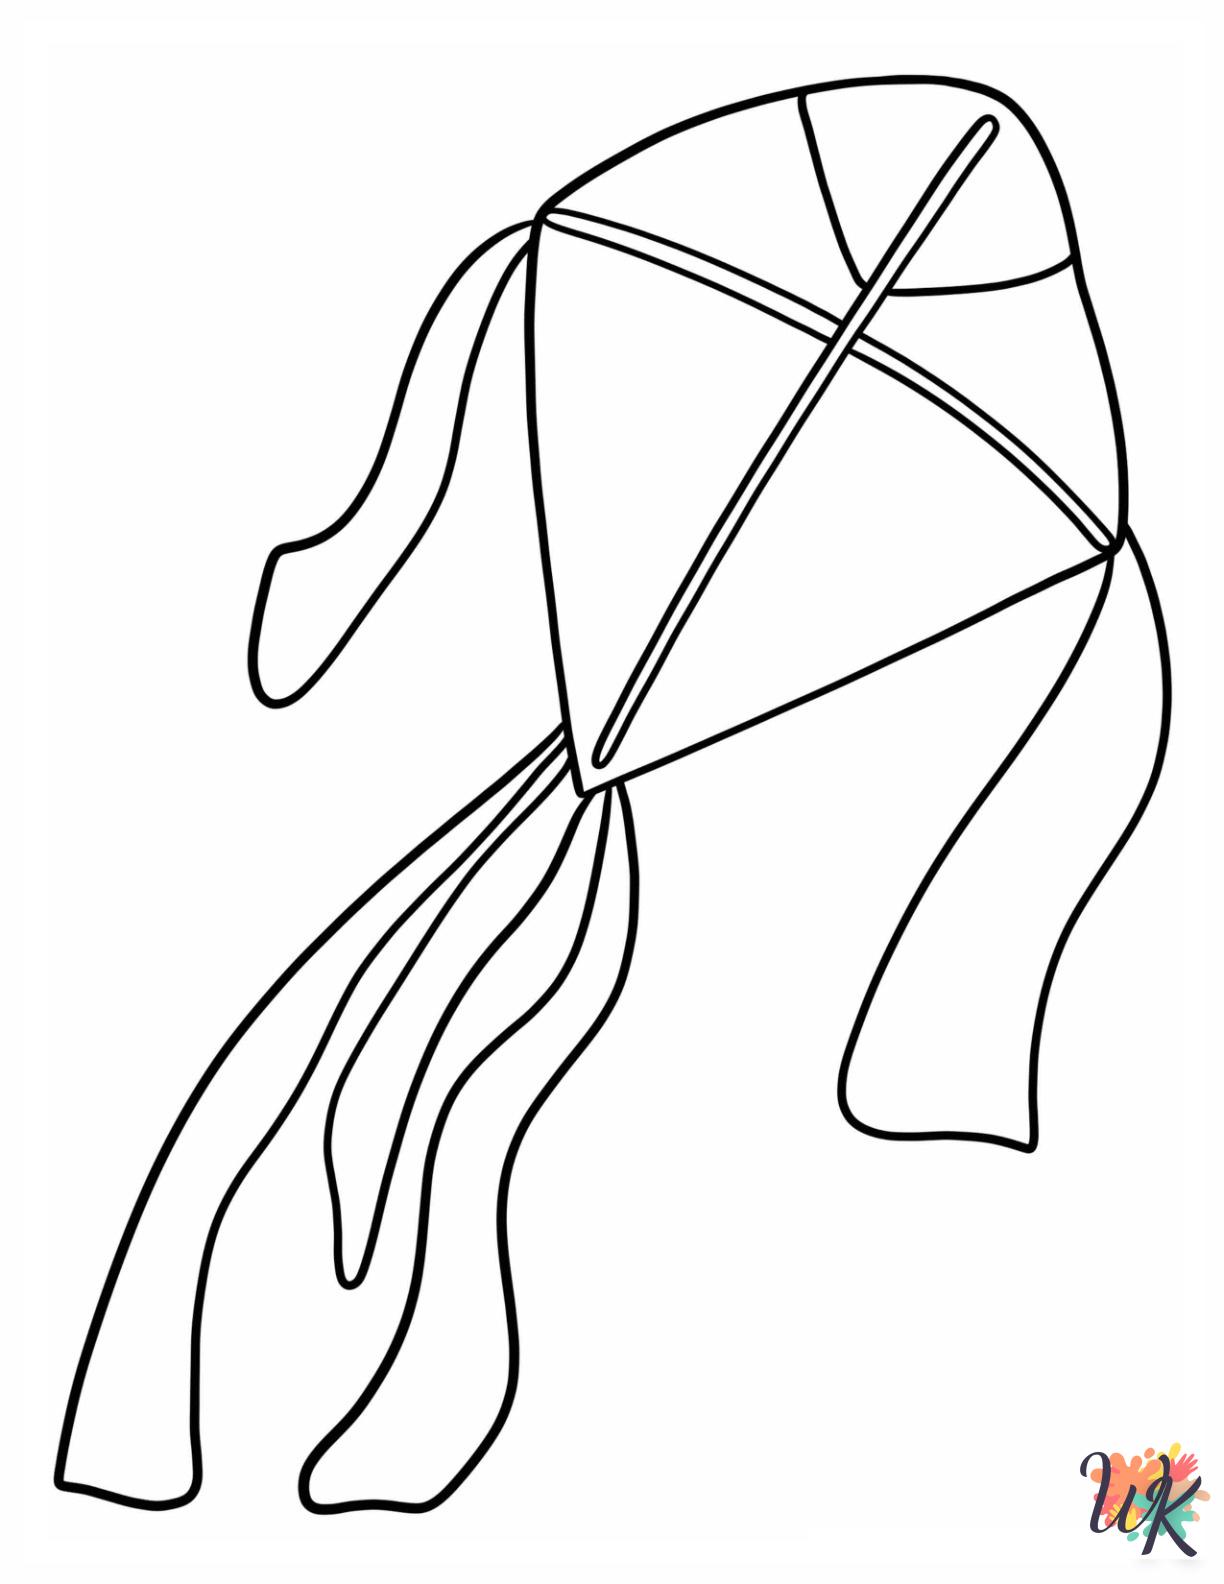 Kite coloring pages free